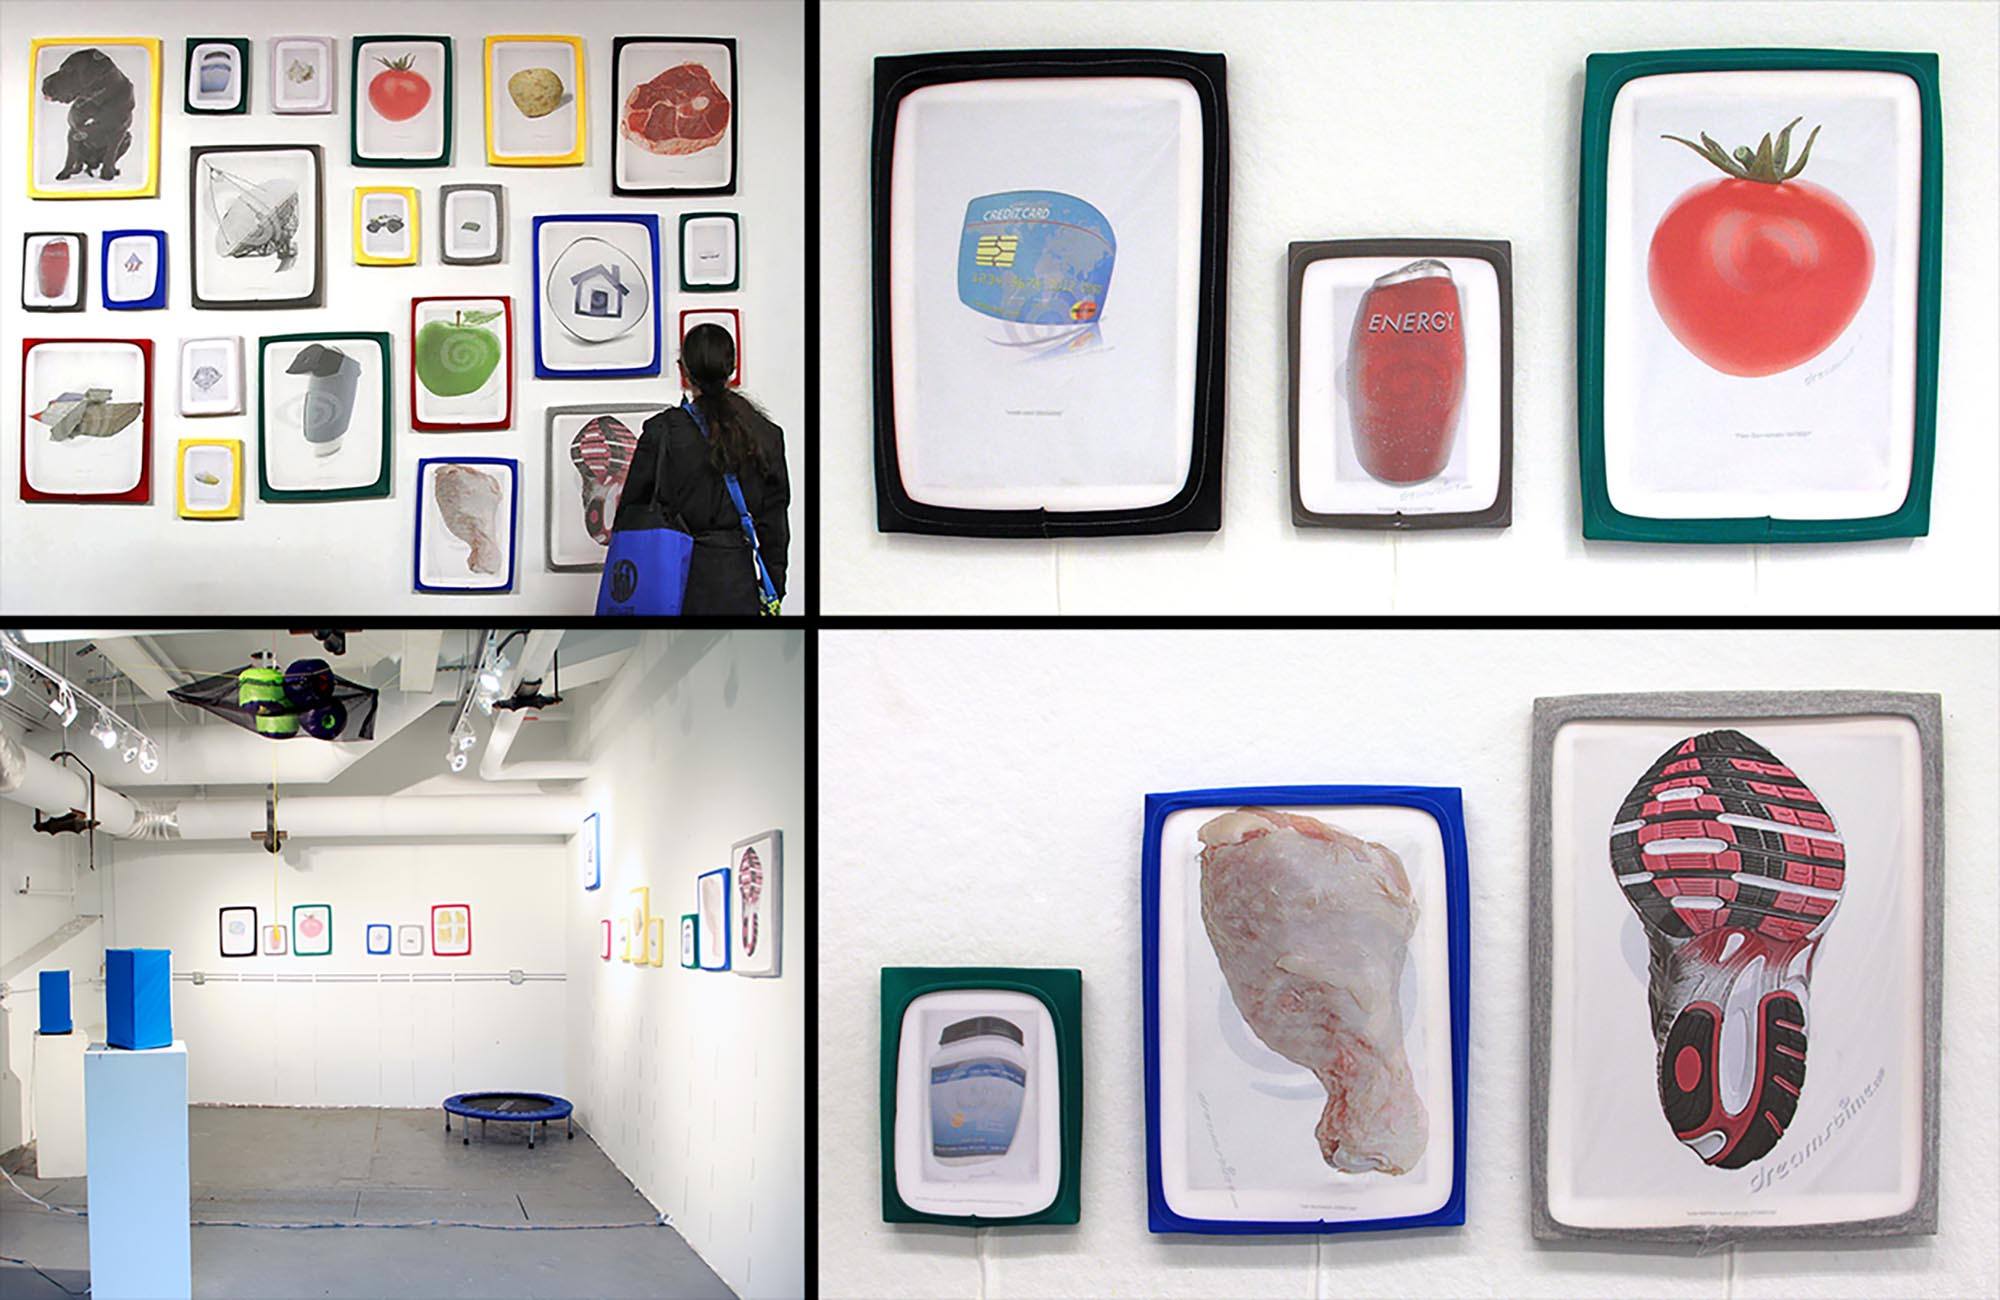 Drawings of different recognizable items including a tomato, a credit card, a raw chicken wing, and a sneaker framed and hung together